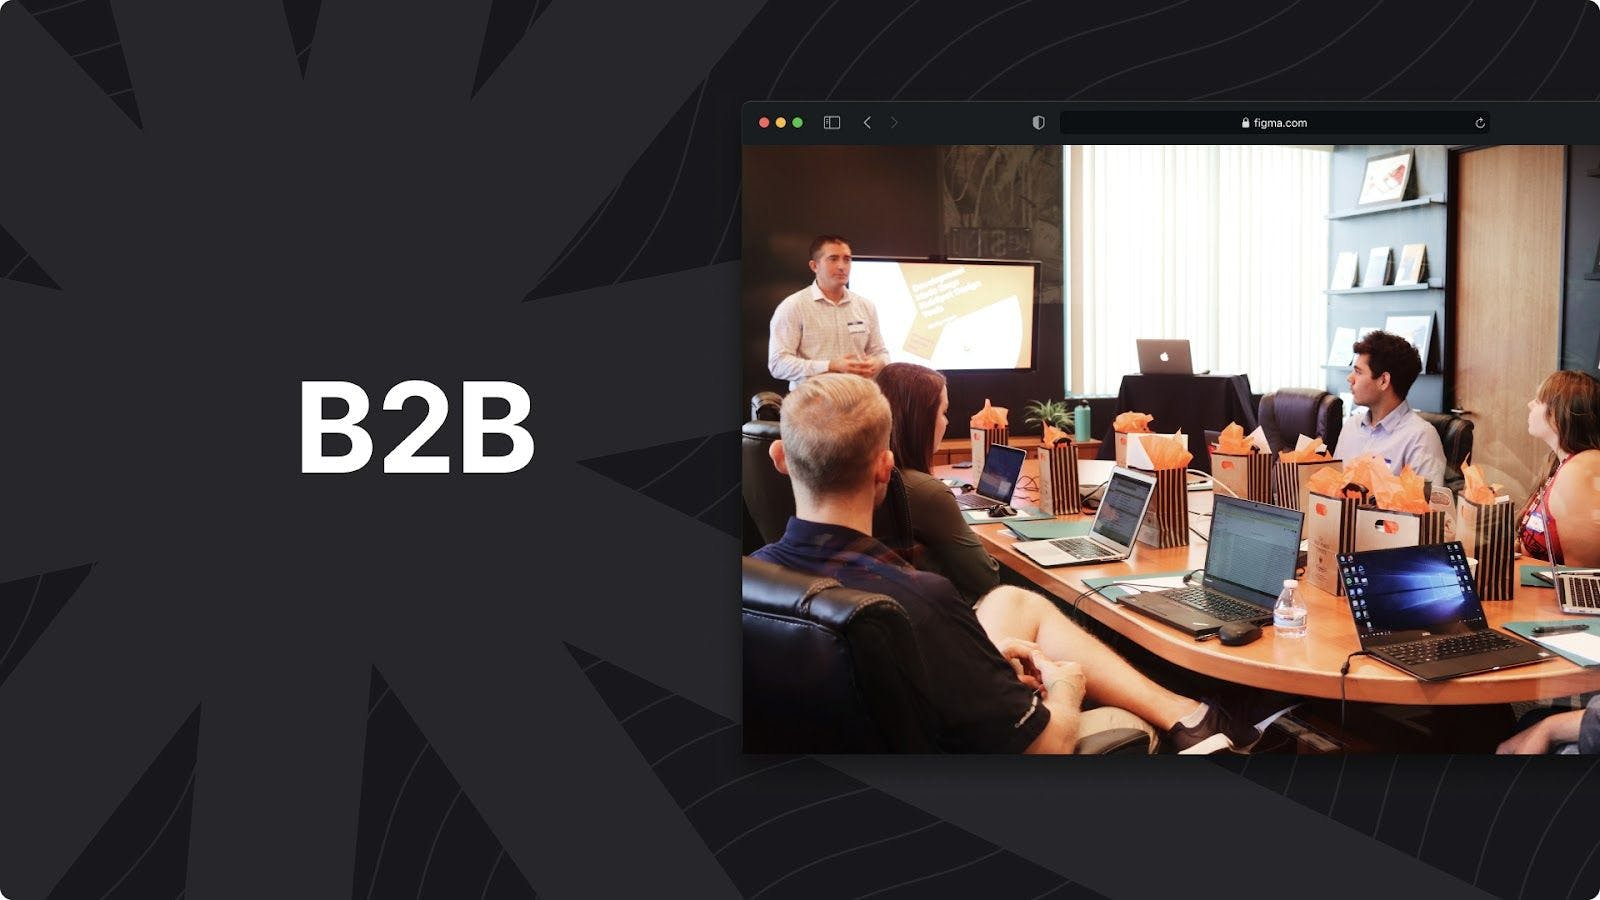 B2B: Simplifying eCommerce Campaigns with Expertly Crafted Pre-Built Landing Pages